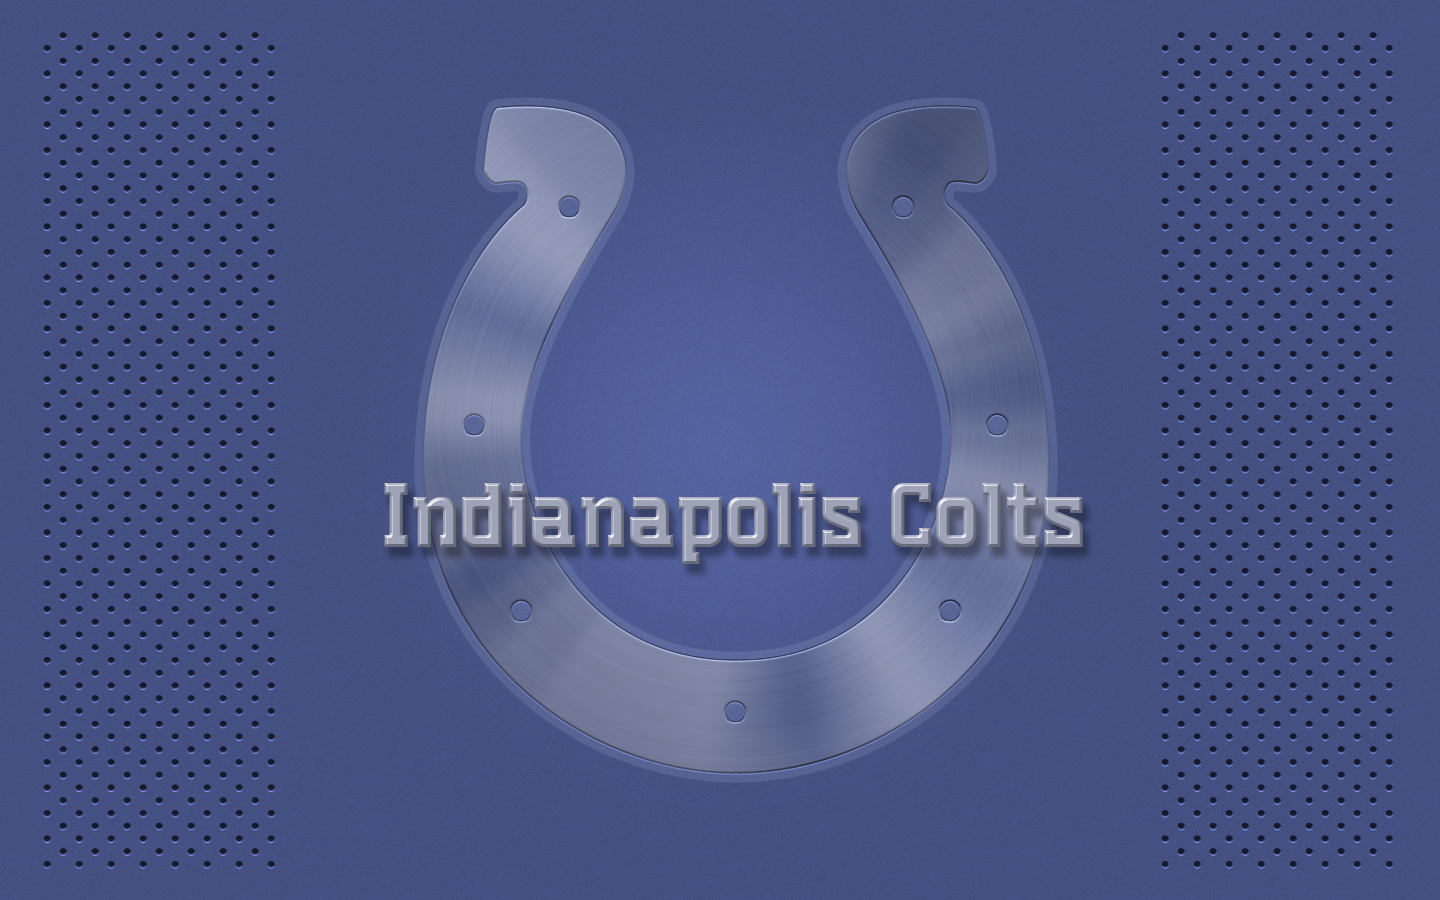 Indianapolis Colts Wallpaper: Indianapolis Colts brushed .